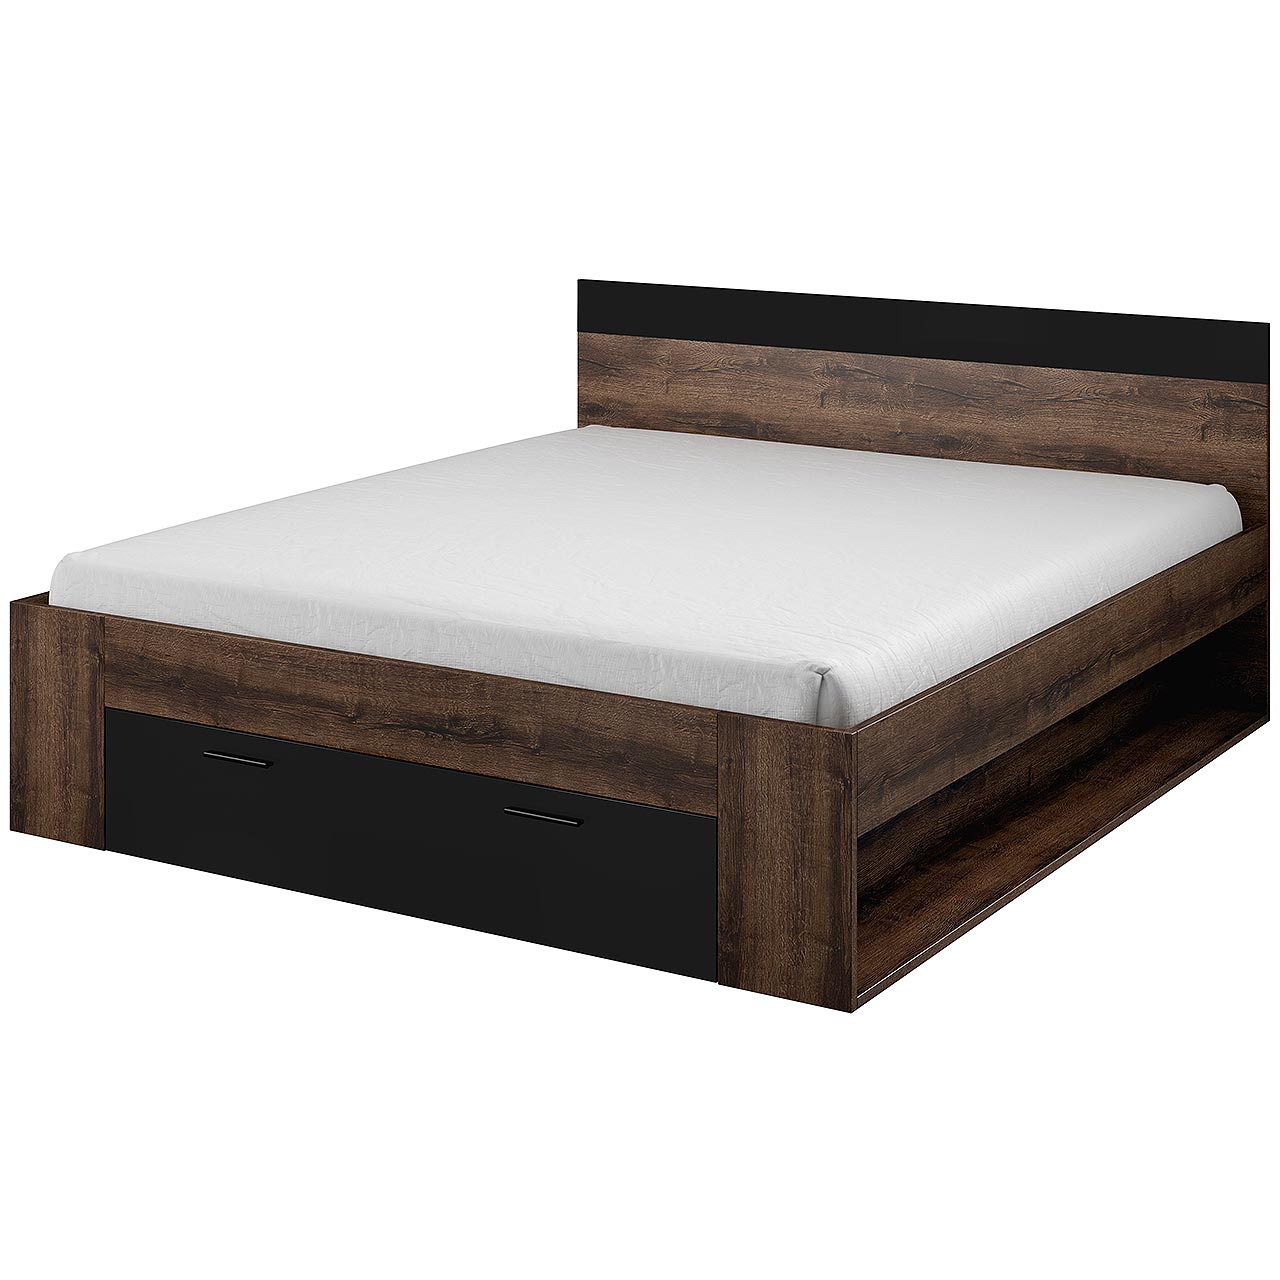 Bed with drawers 180x200 BETA BE92 monastery oak / black